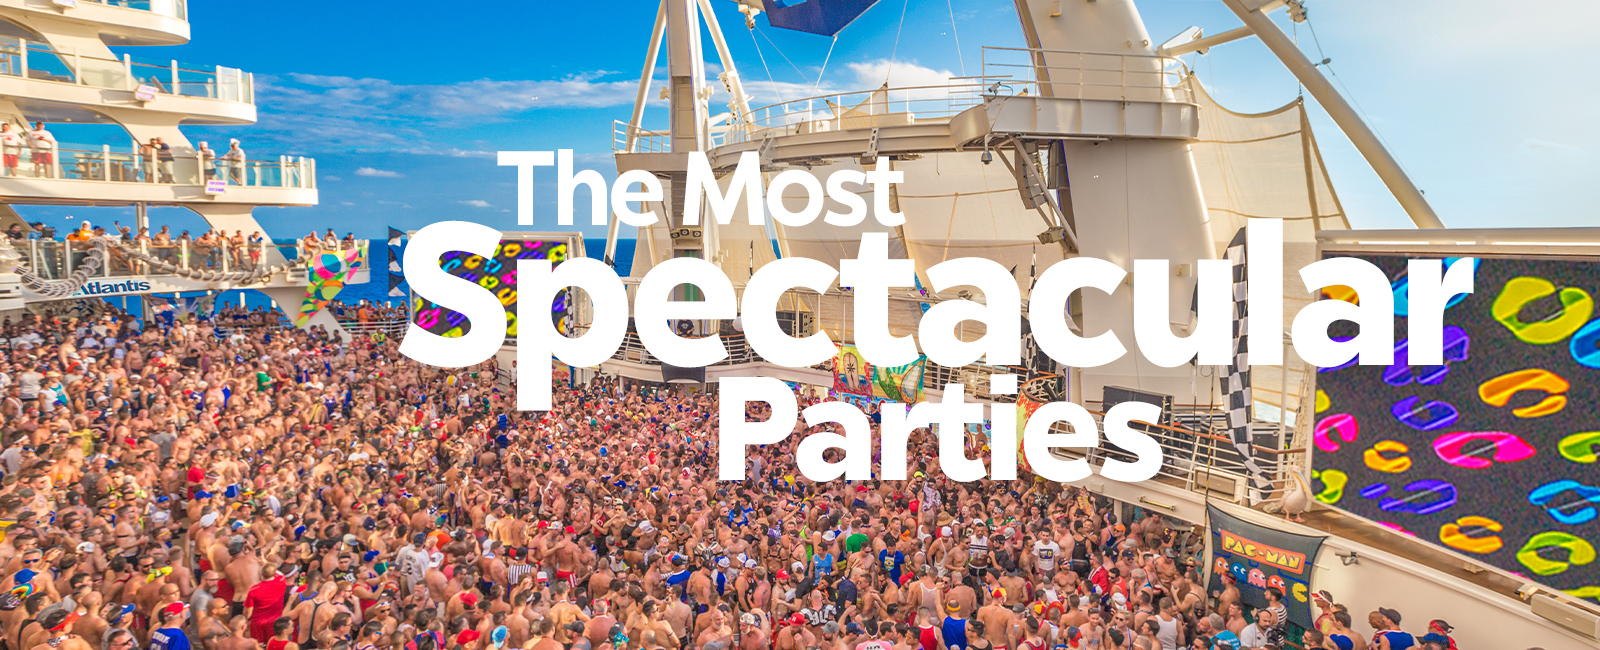 the most spectacular parties